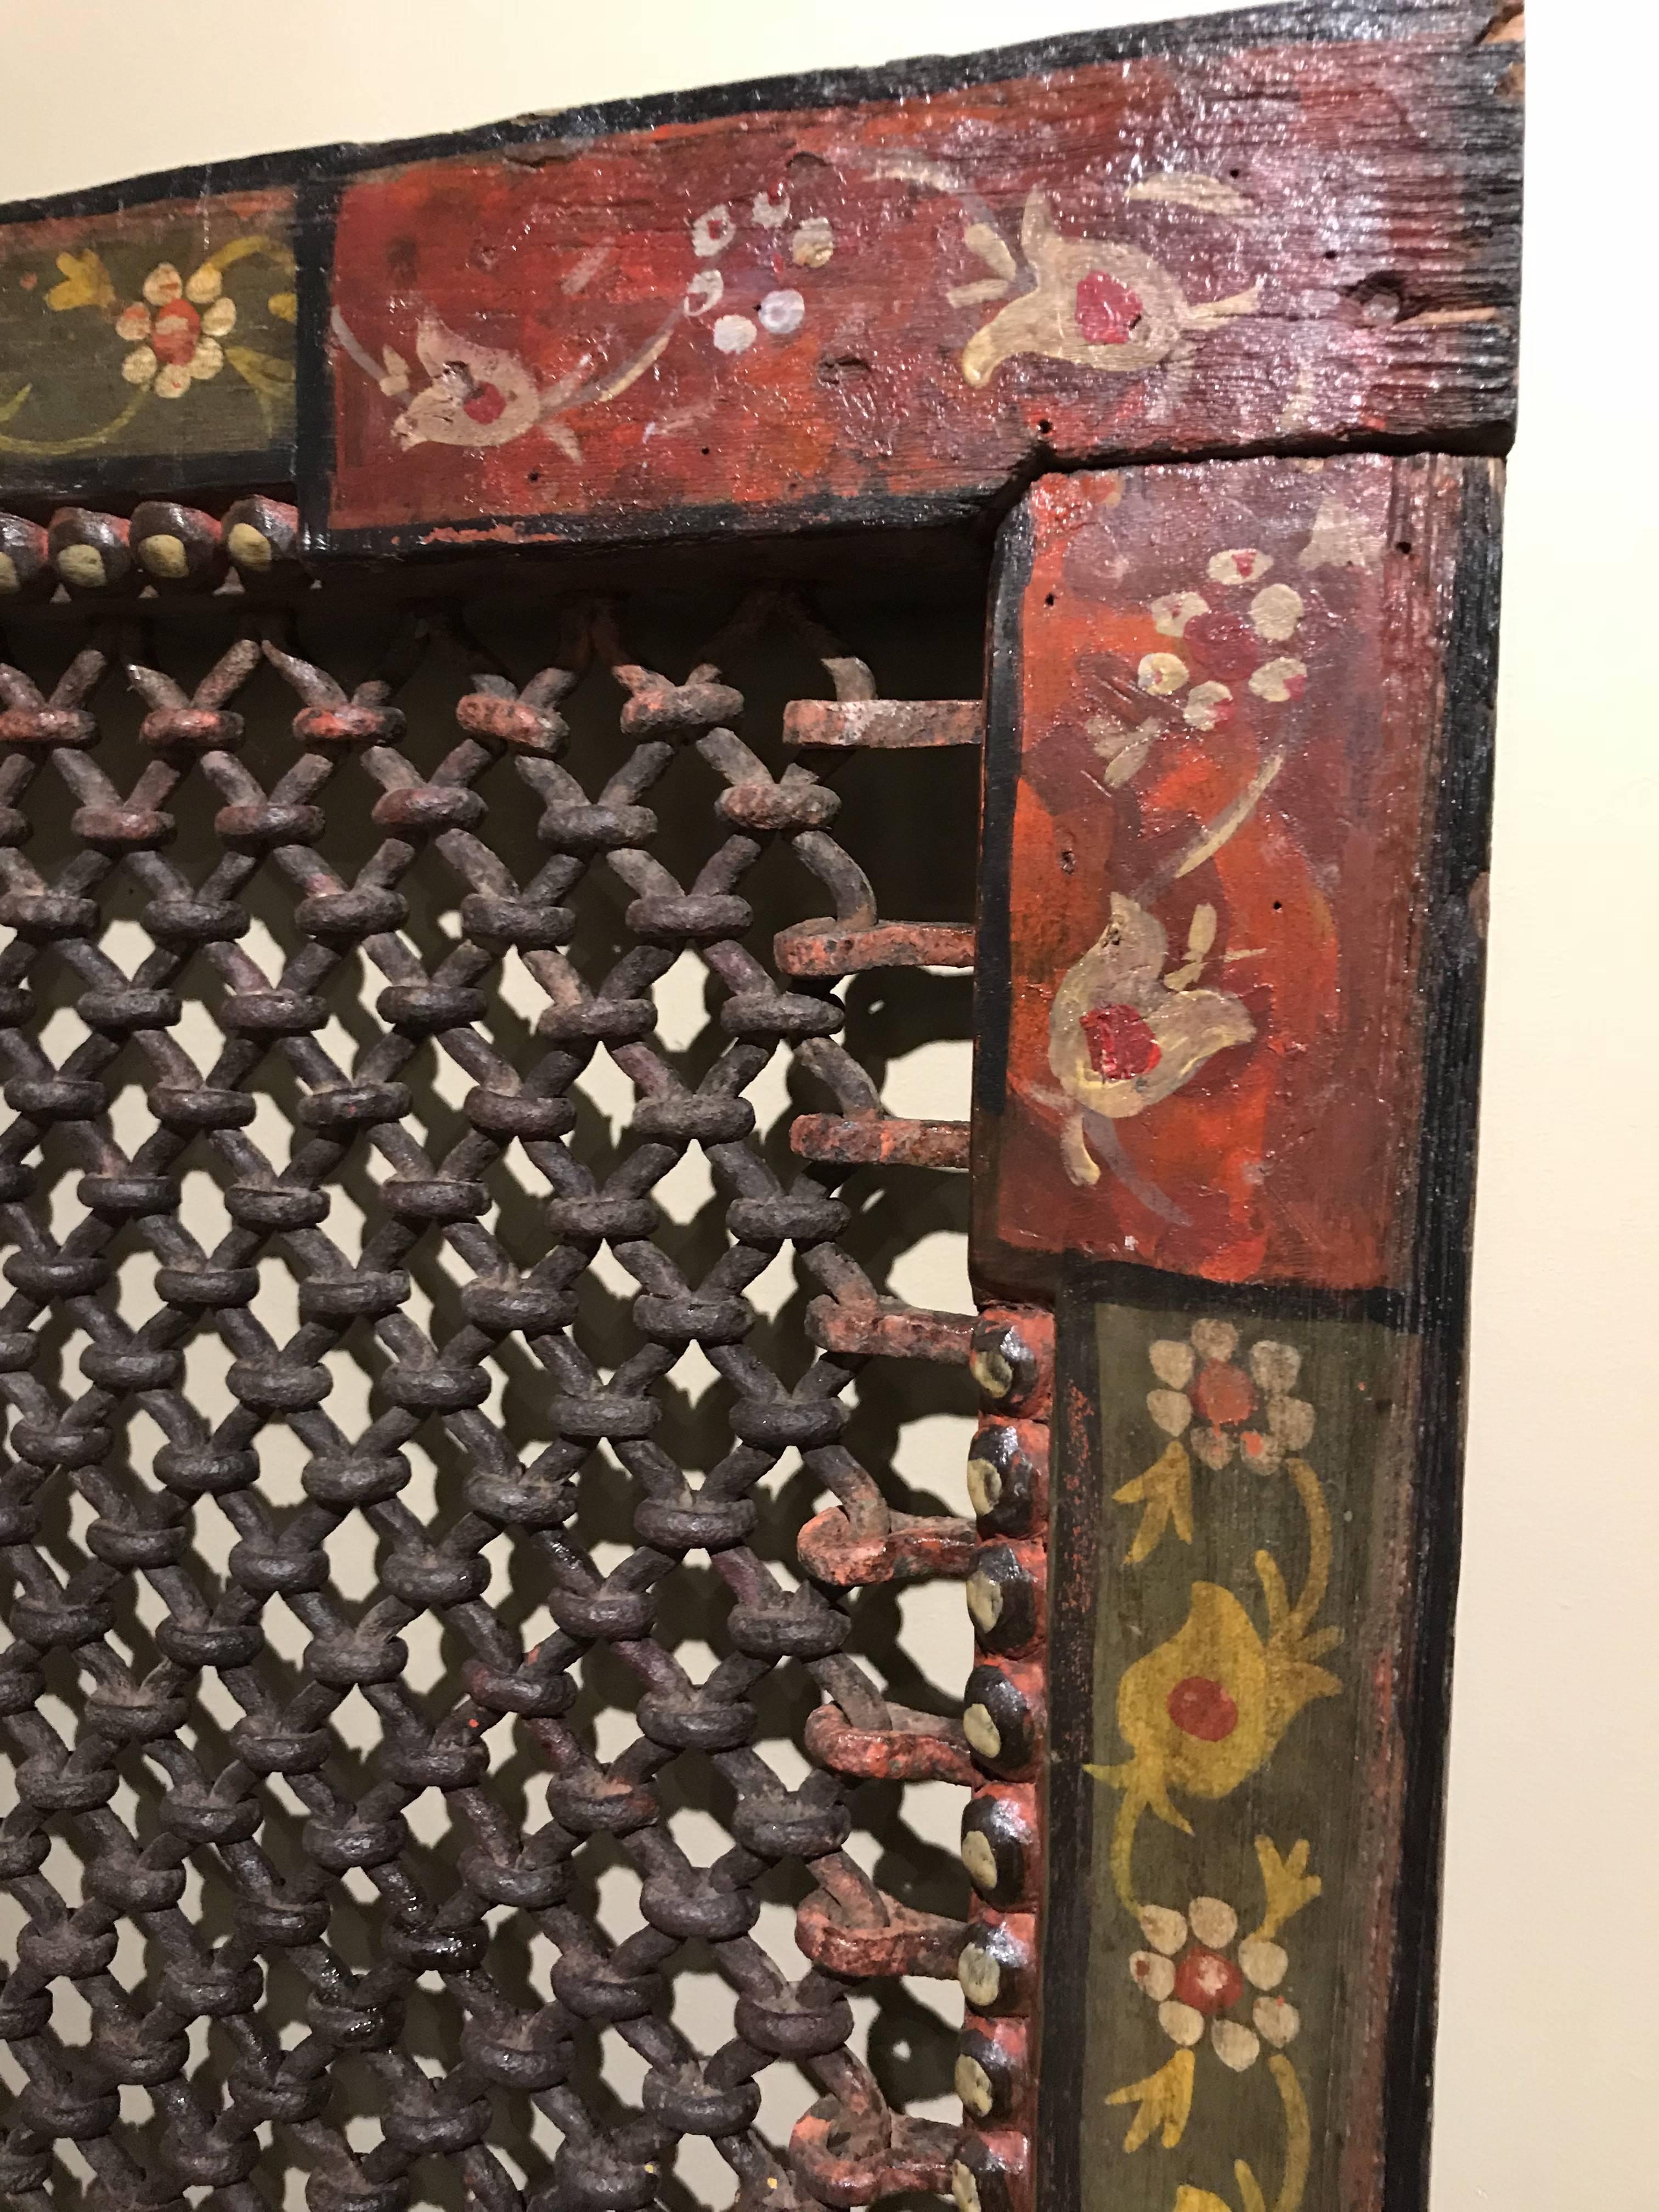 A fine example of a Indian polychrome surround with woven wrought iron grill and wooden border, painted with foliate decoration, probably dating to the 19th century. Perhaps originally used as a shutter or window on an Indian temple or home. Very